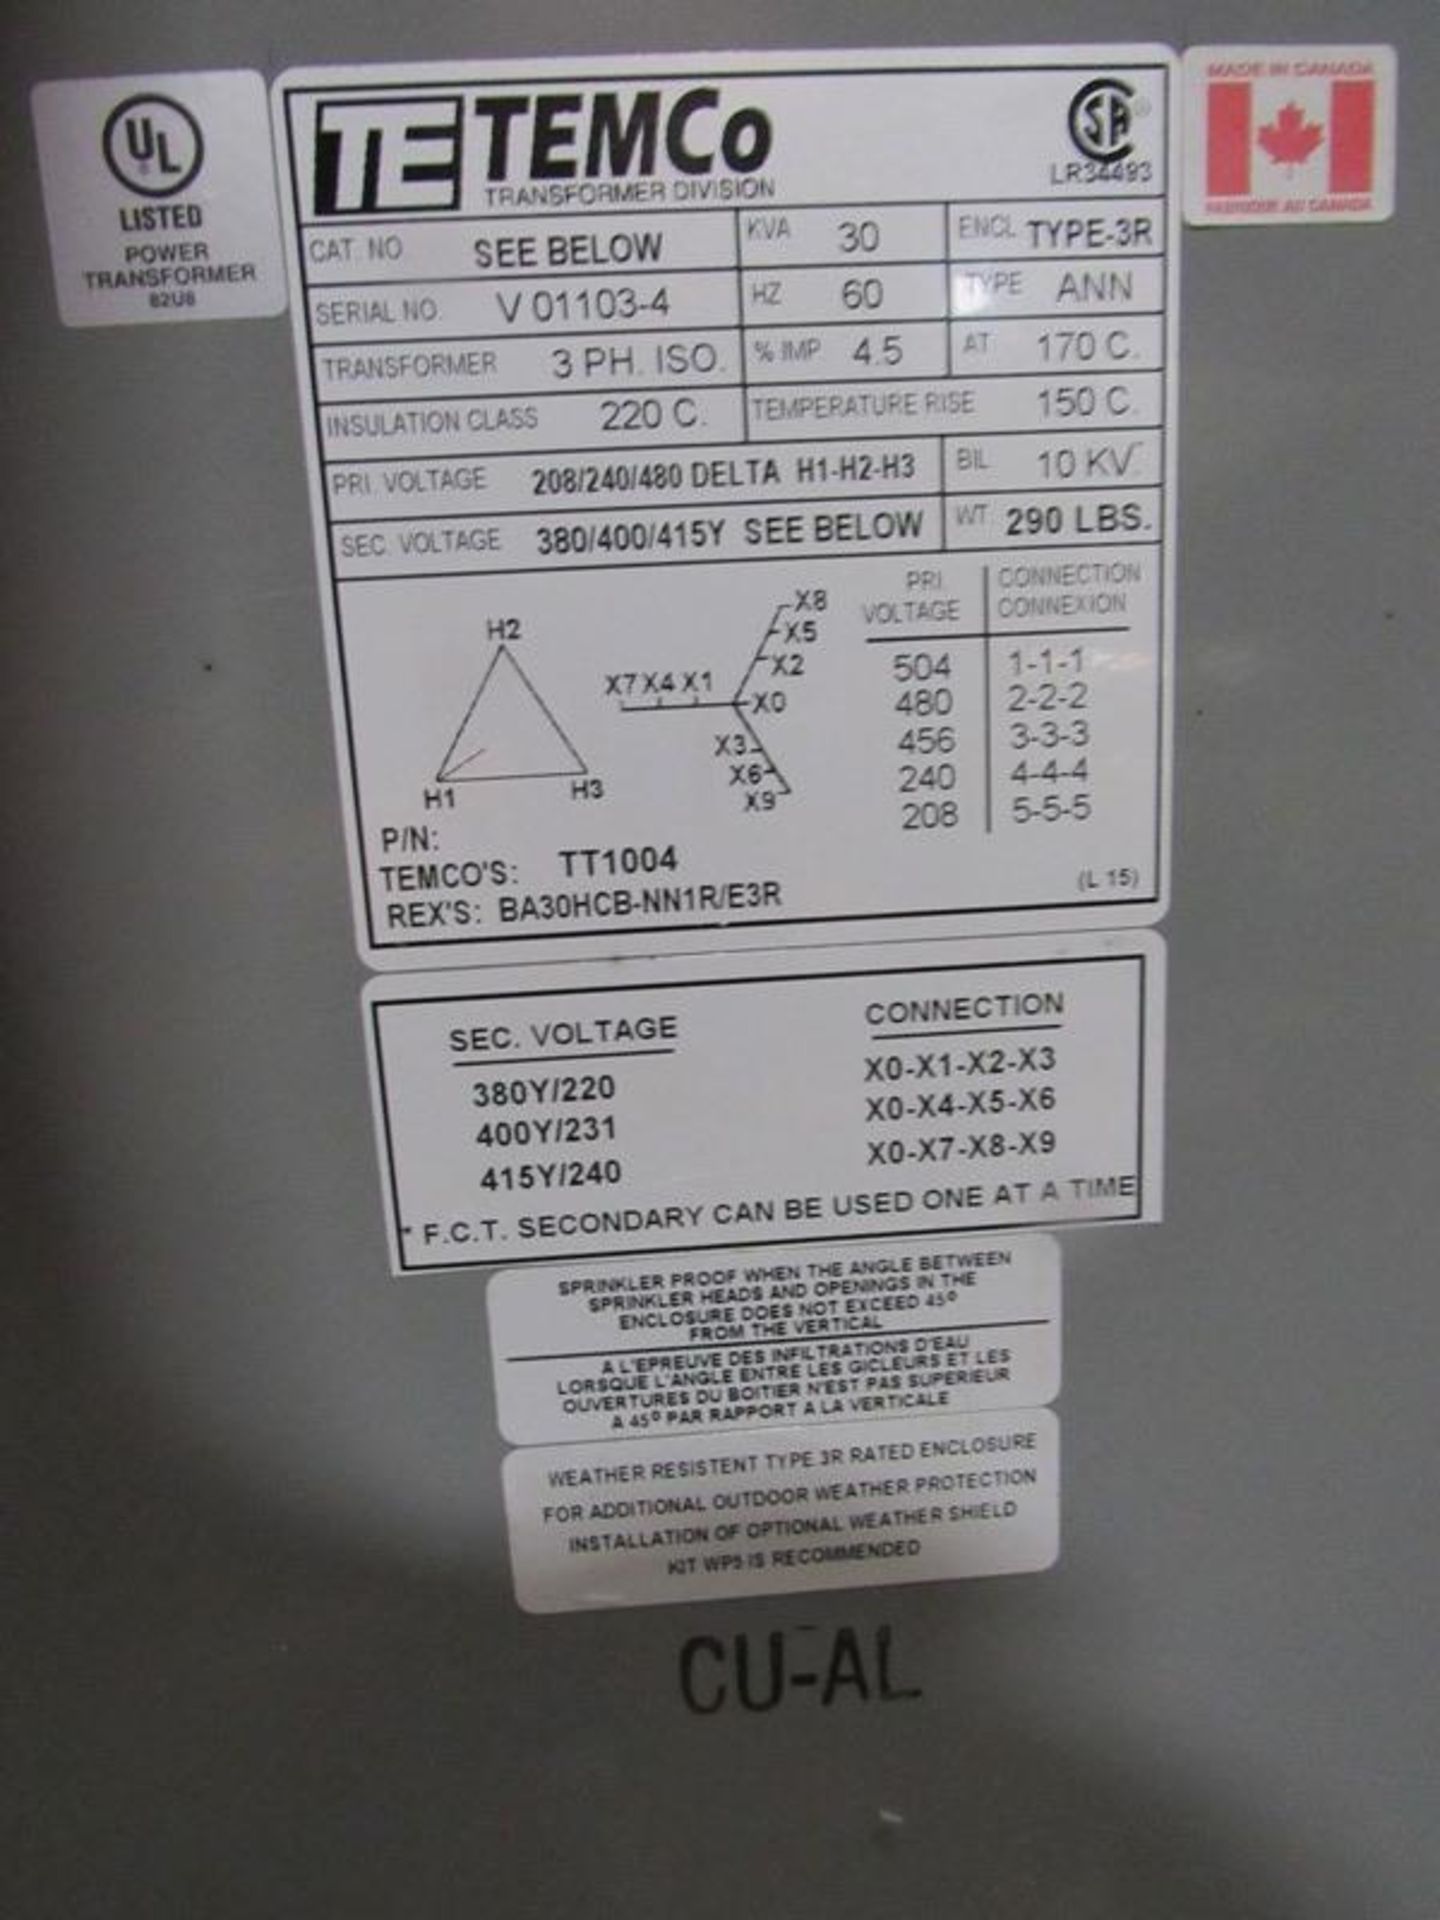 Temco Mdl. TT1004 Transformer in 3R enclosure, Type: ANN, 3 phase, ISO, 60 hz, primary voltage 208/ - Image 3 of 3